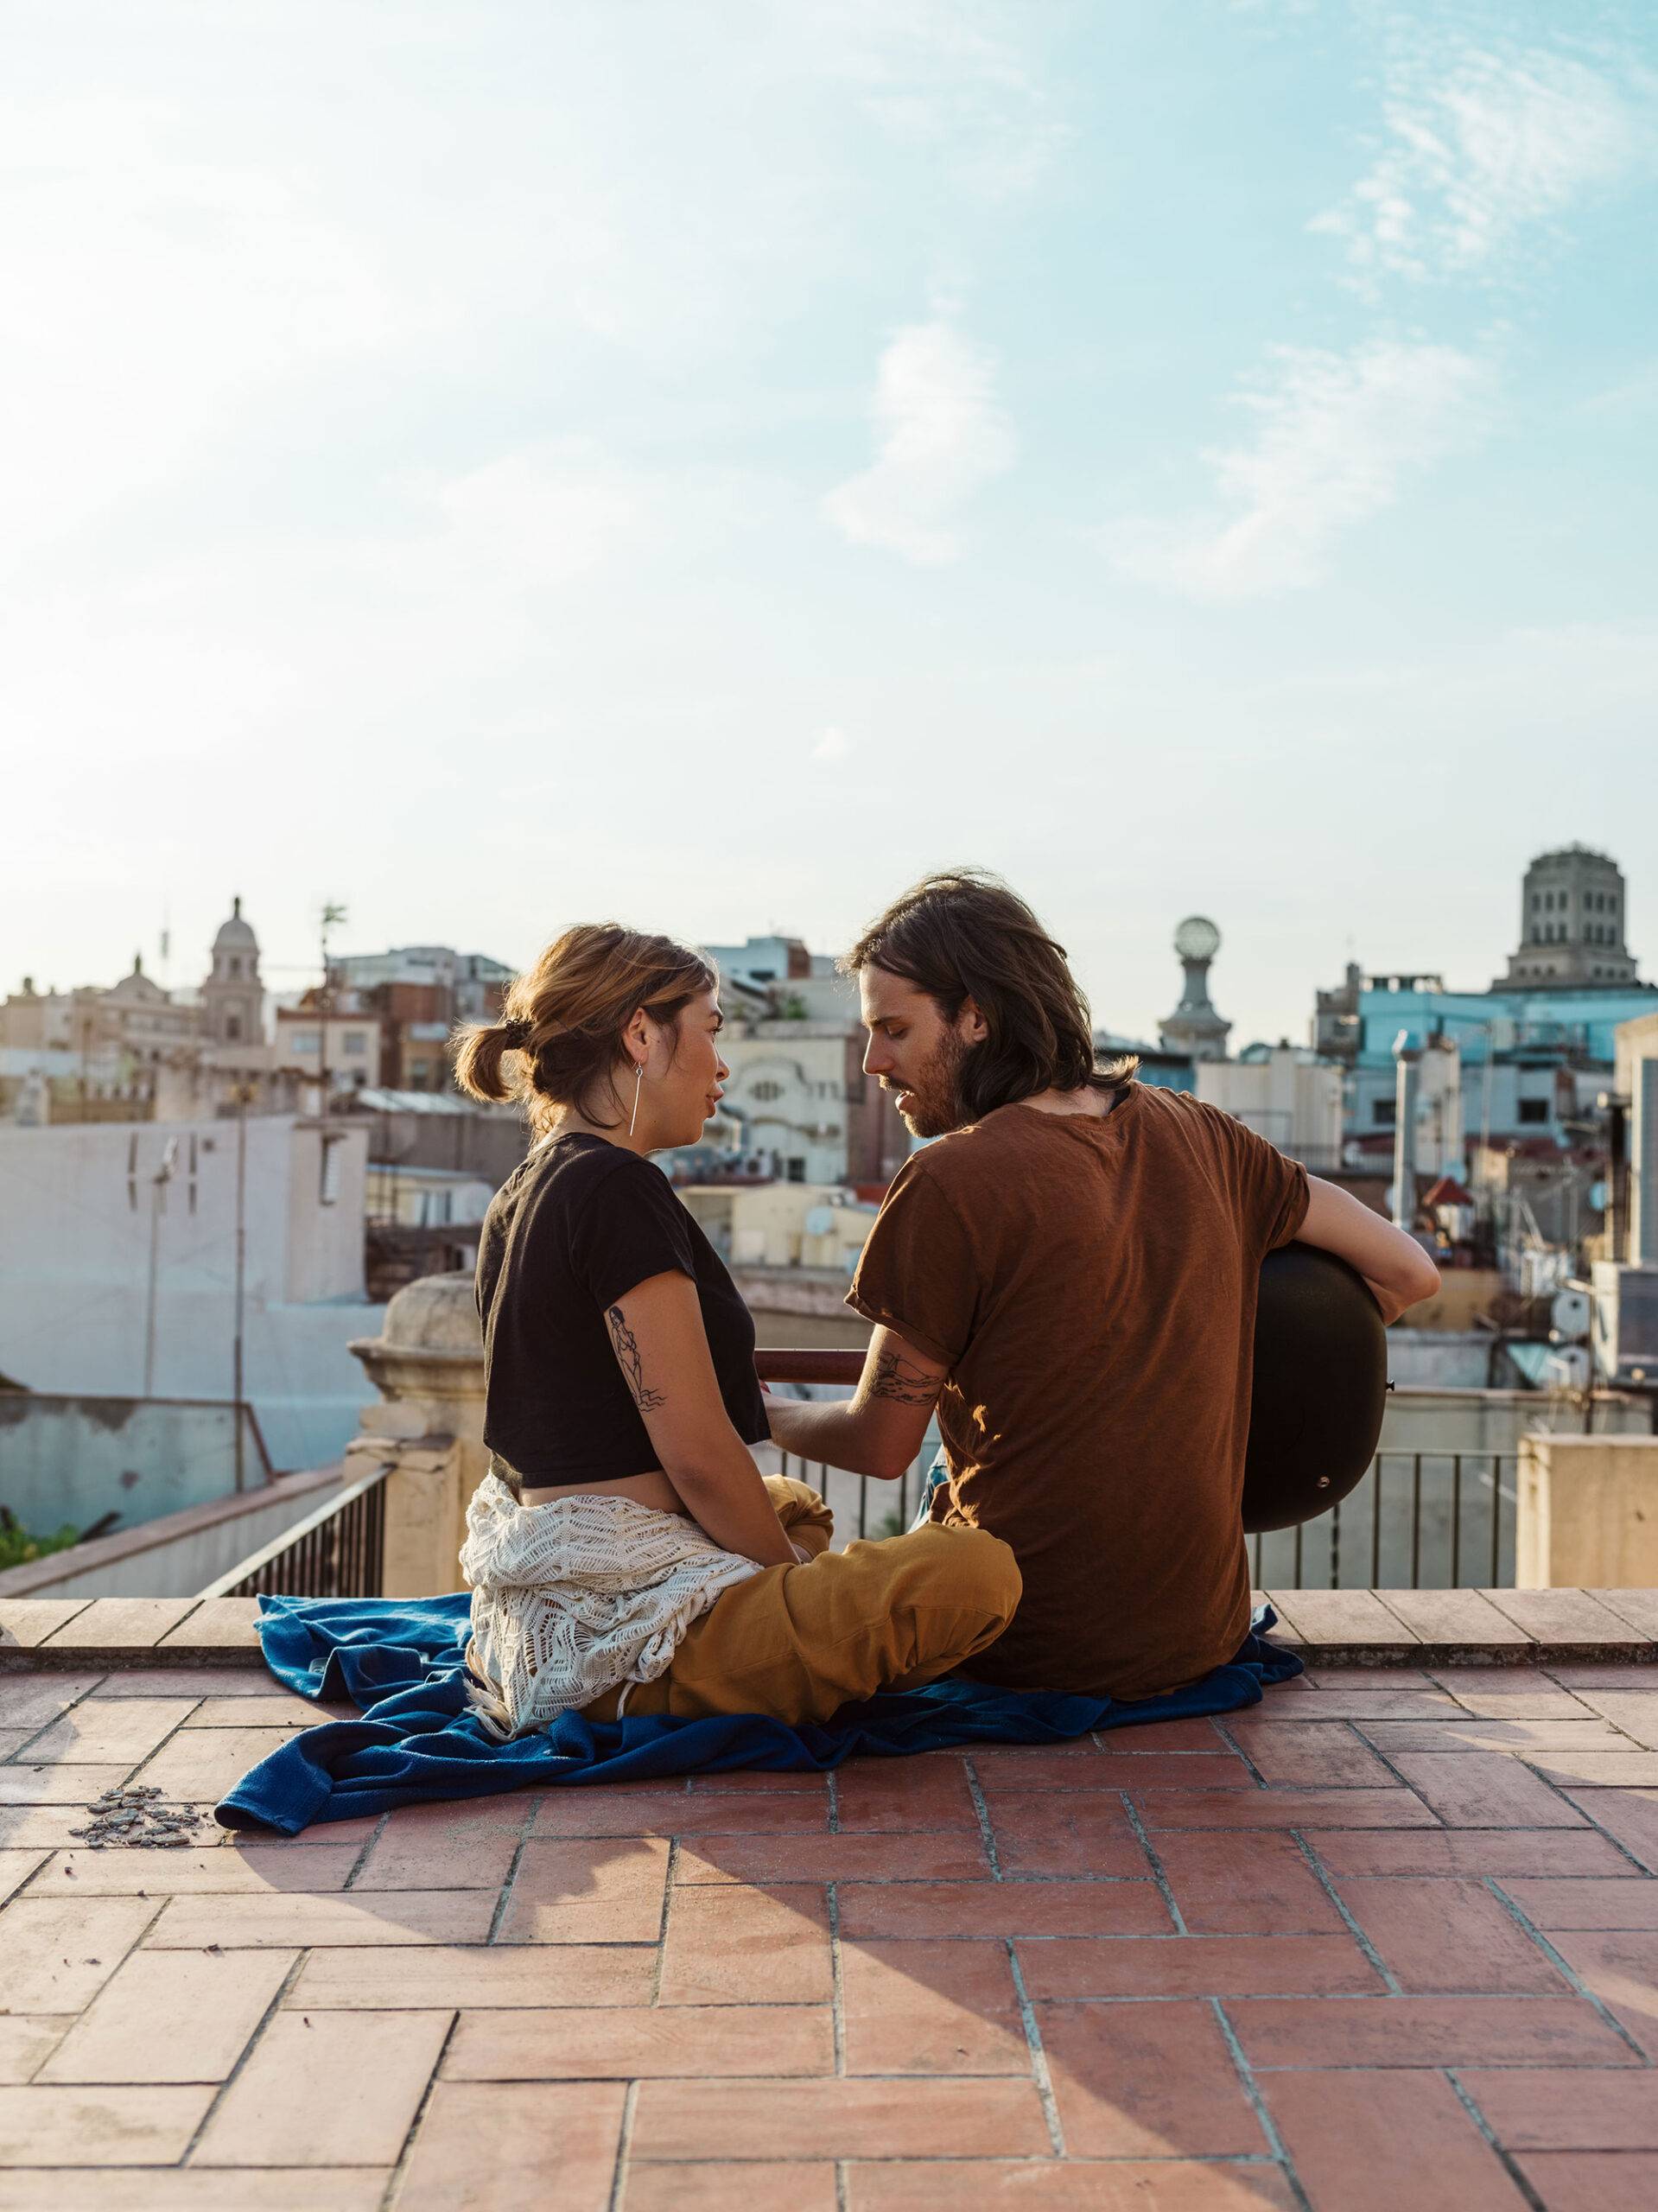 Back view of man with guitar witting on rooftop with stylish woman singing together on background of city and blue sky. Romantic dating